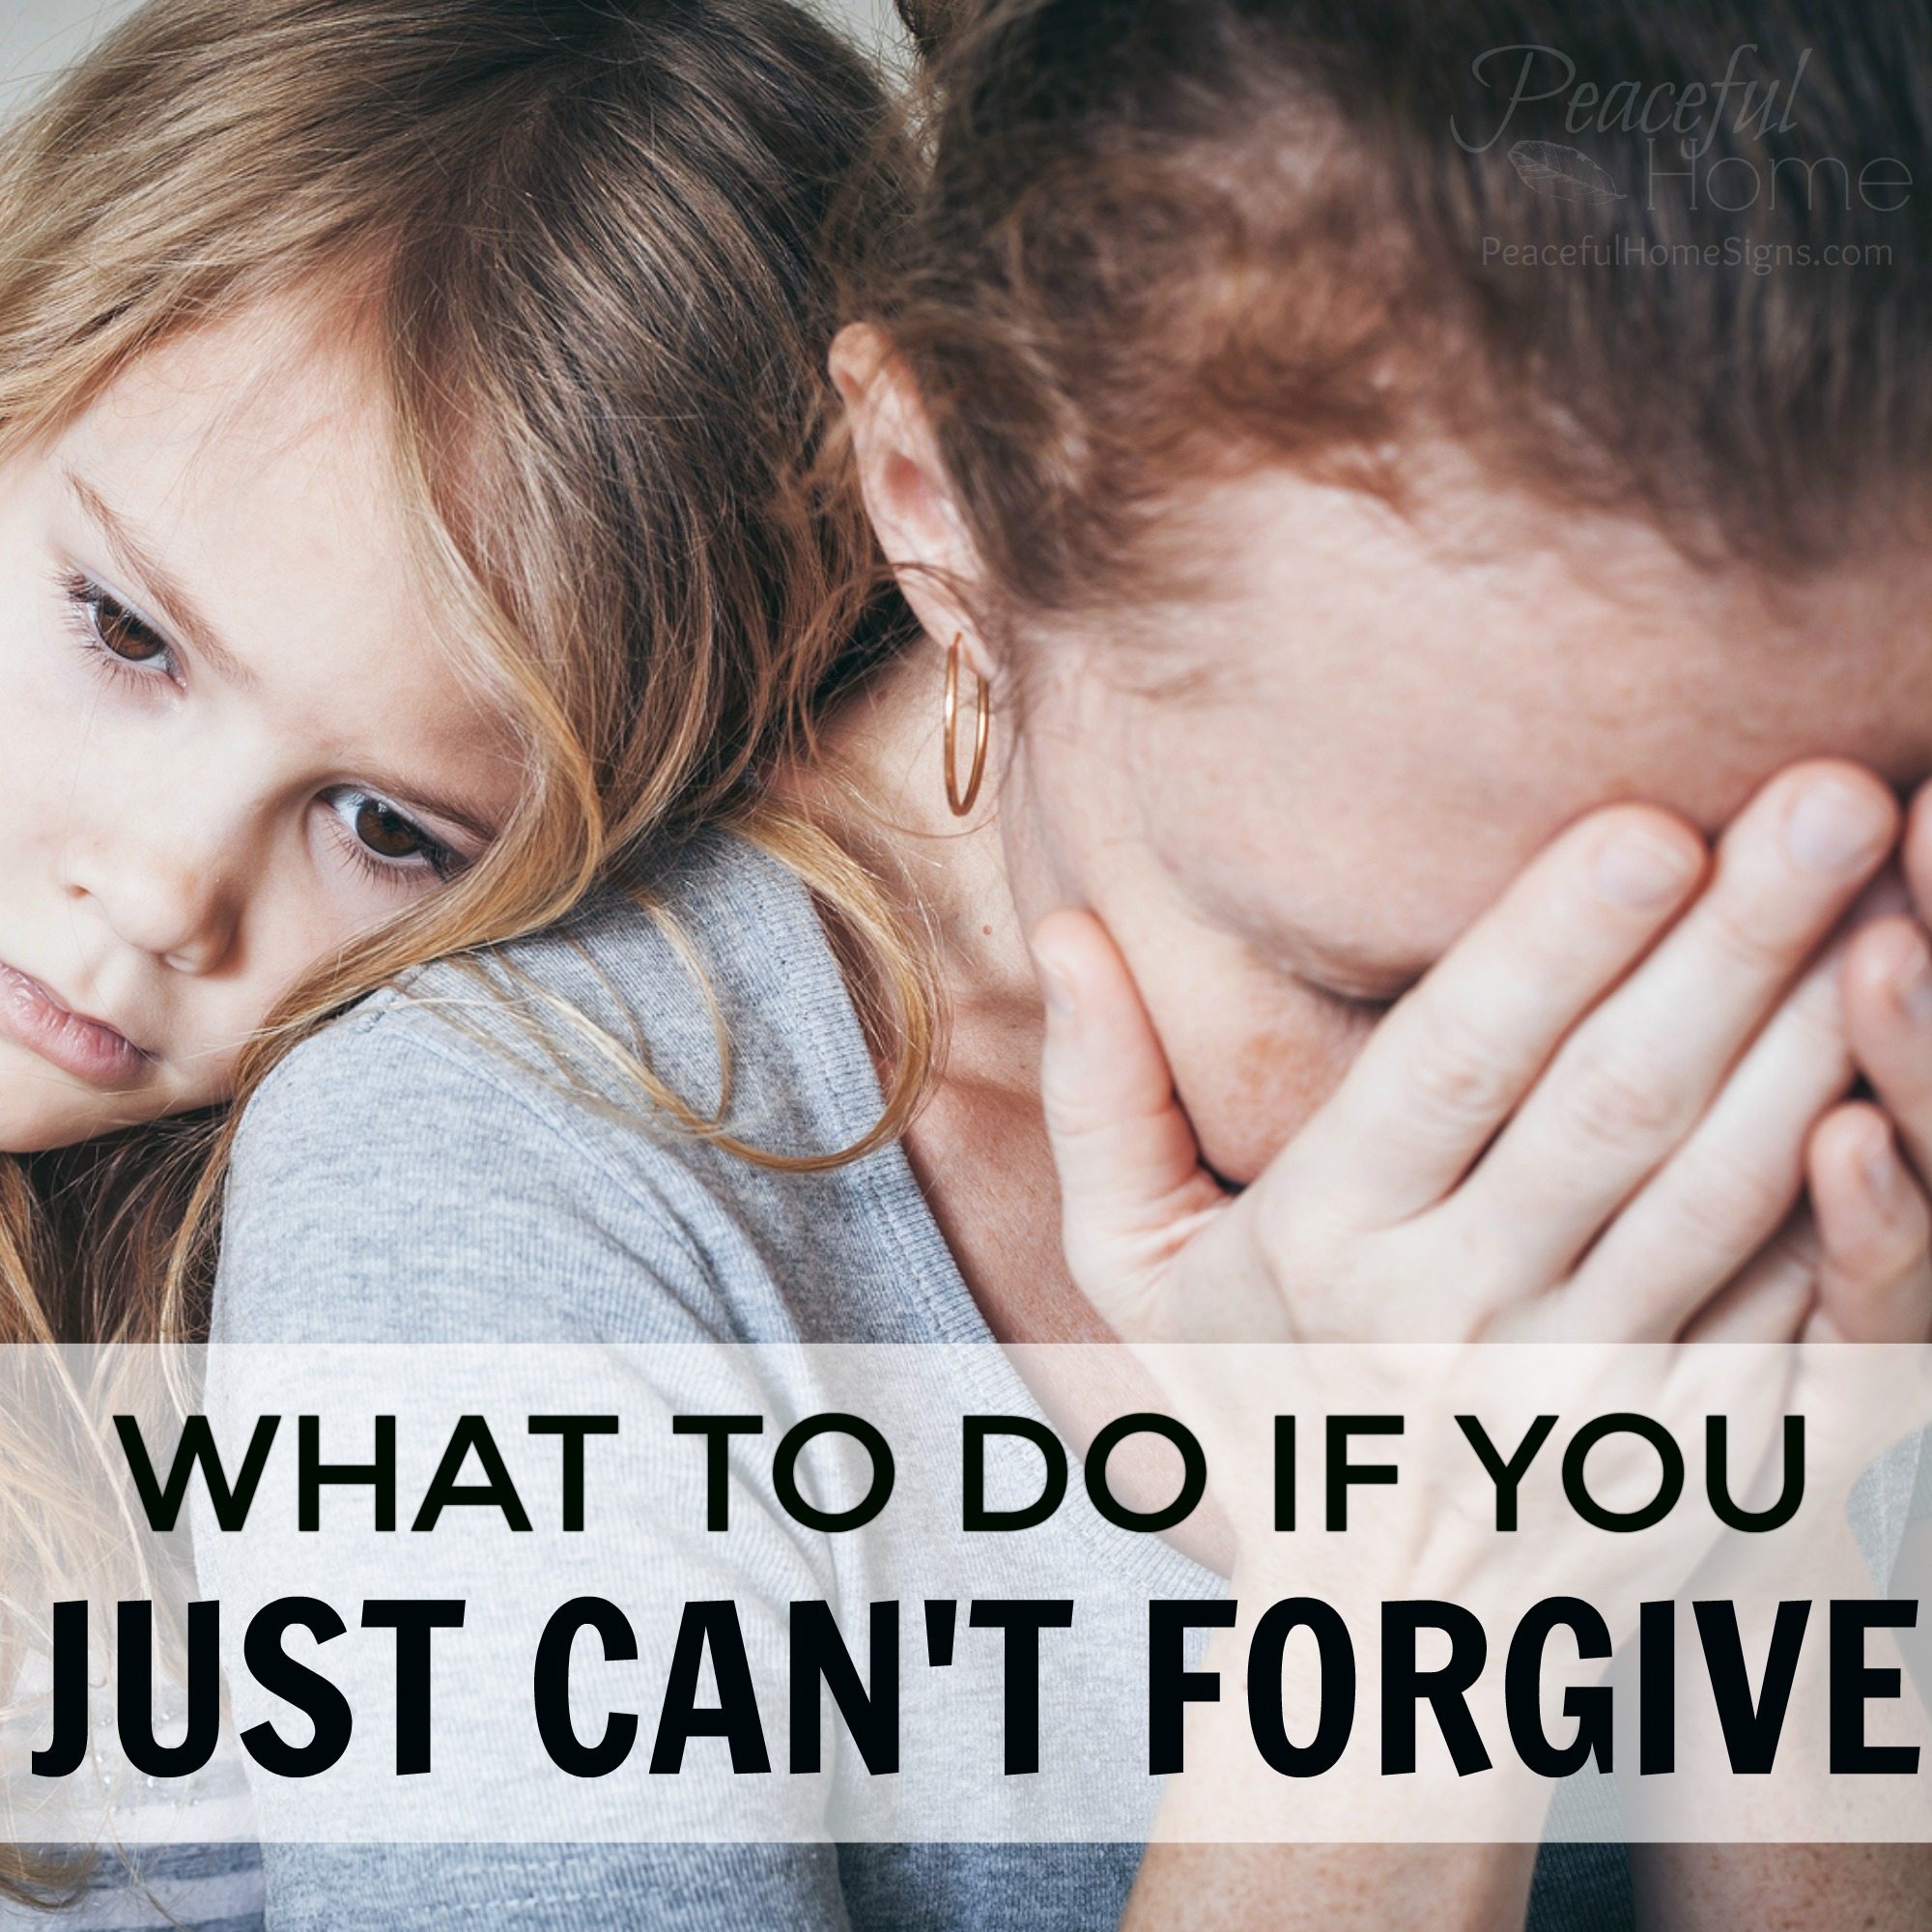 What to do if you just can’t forgive